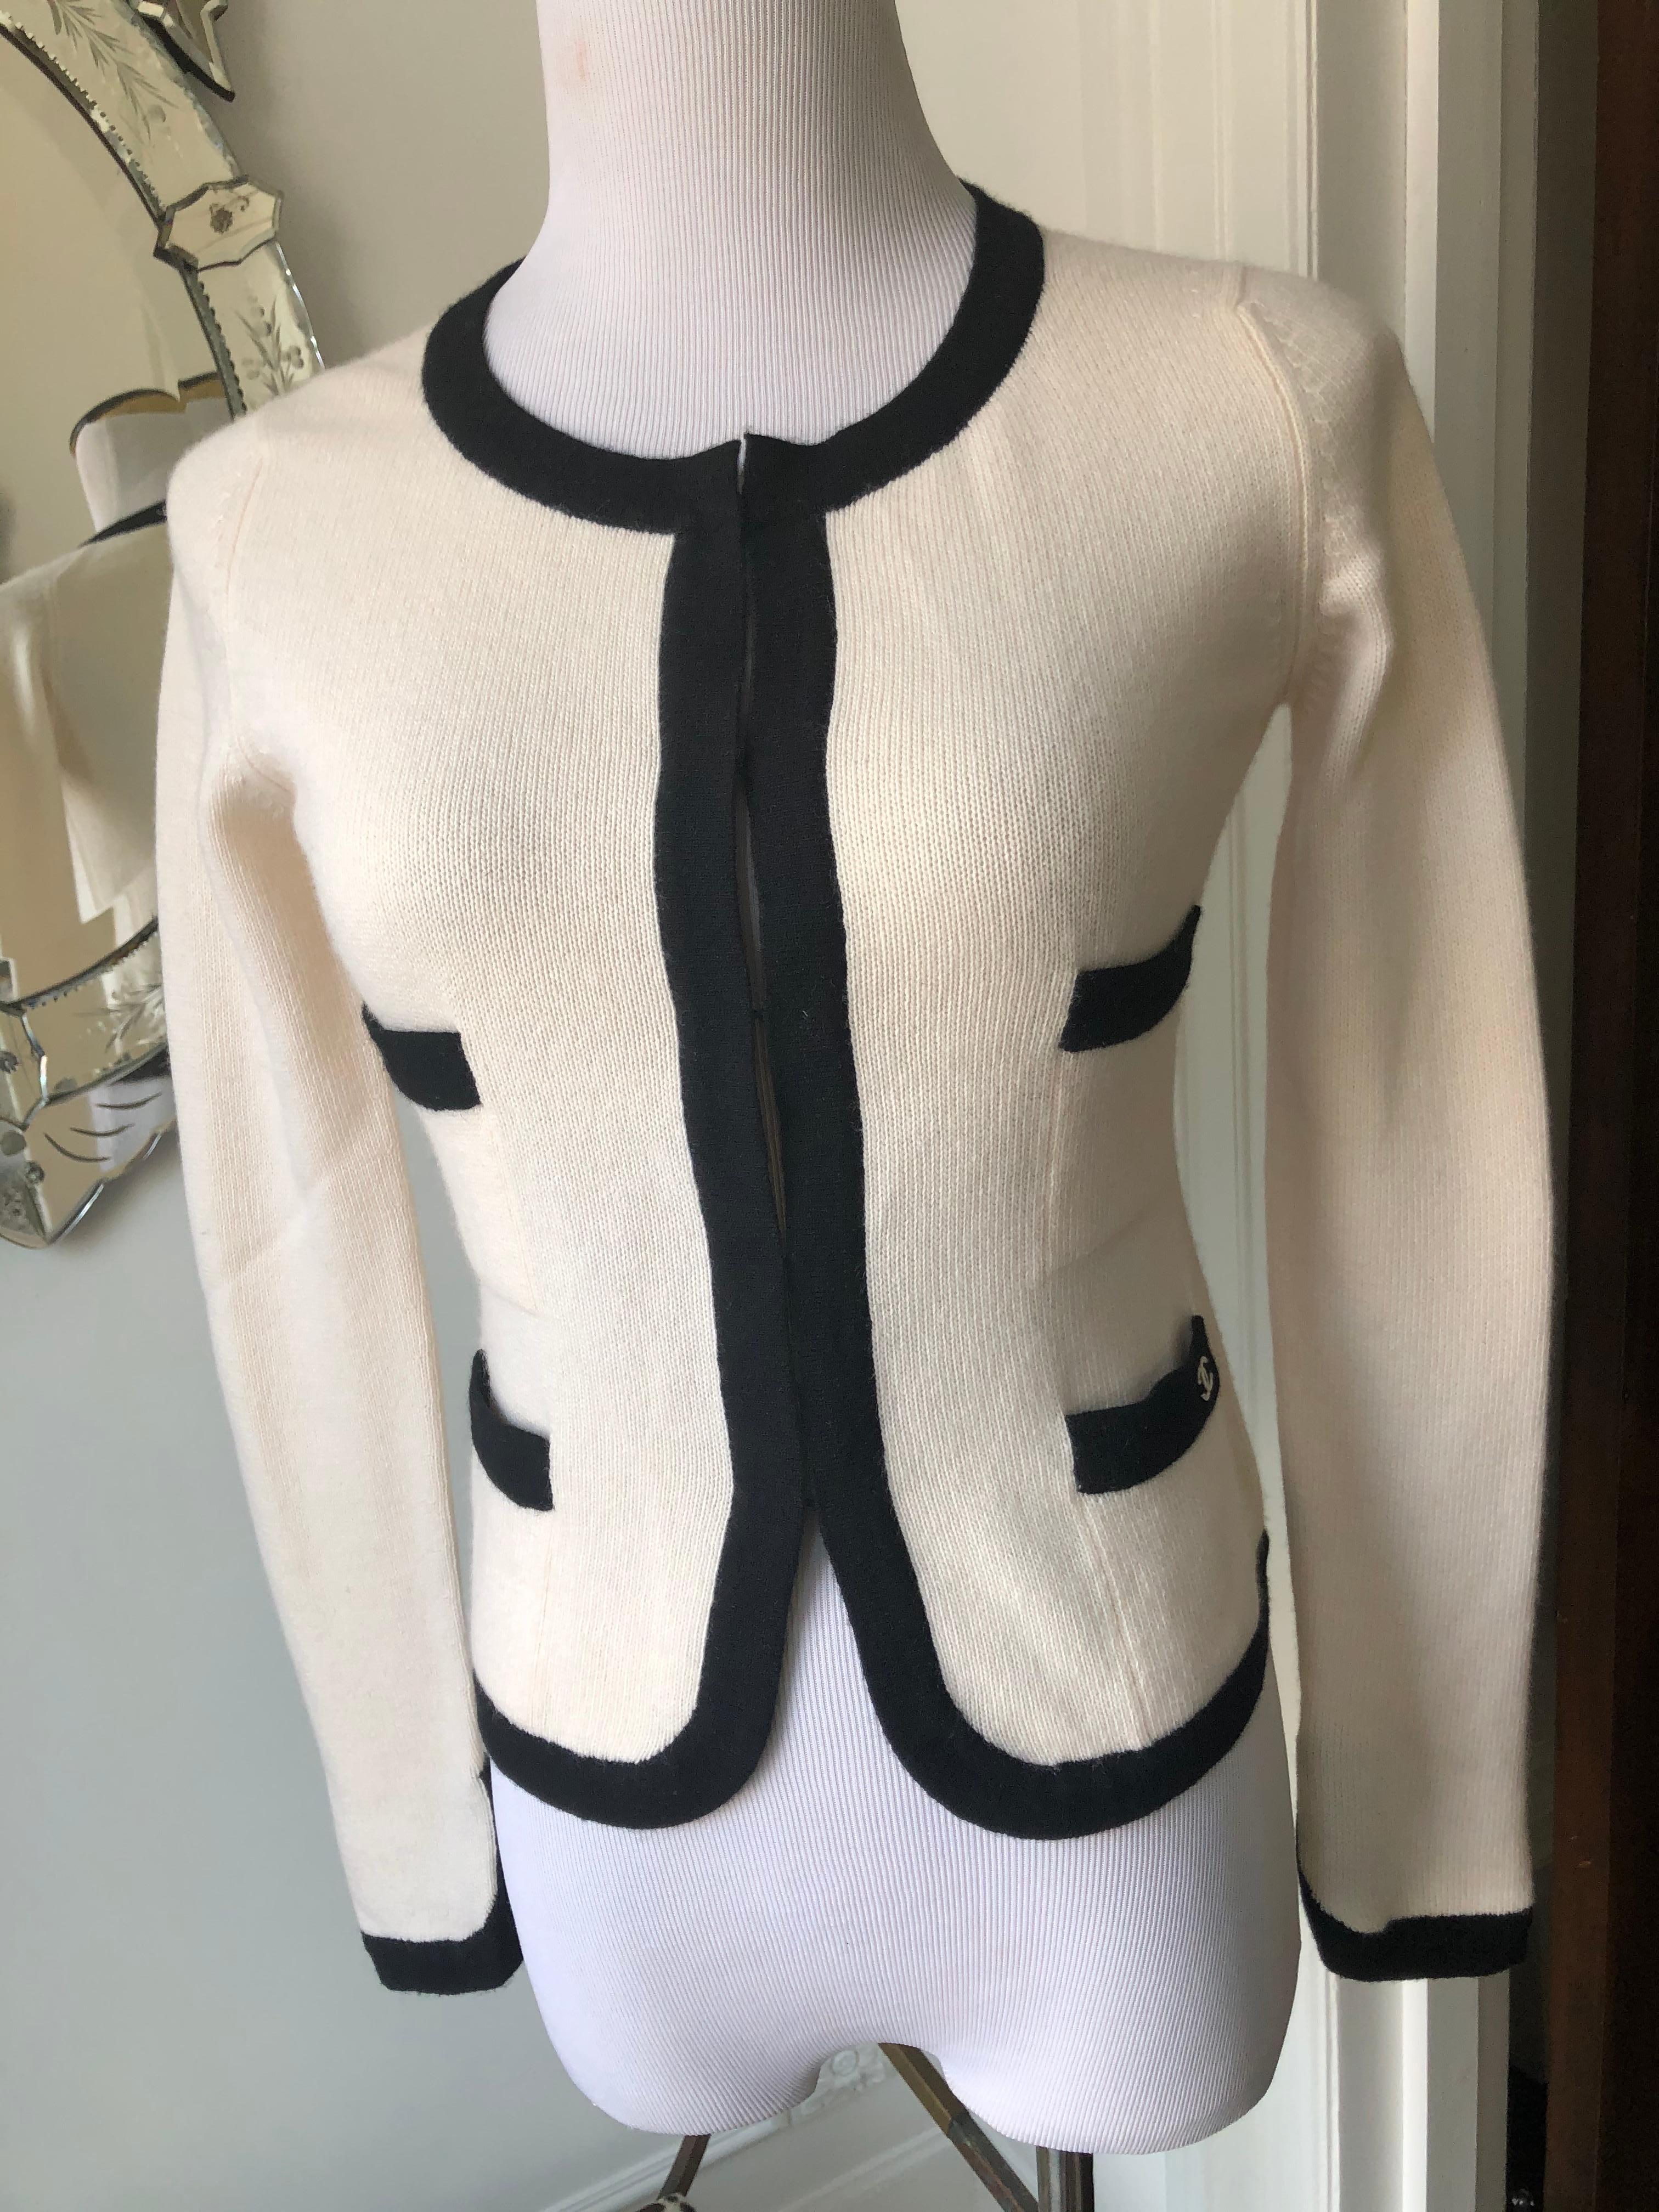 This is a lovely Chanel cream with black trim cardigan in 100% cashmere
with CC logo on front pocket.
Hook and eye closure. Very good condition.
Measurements
Length 19